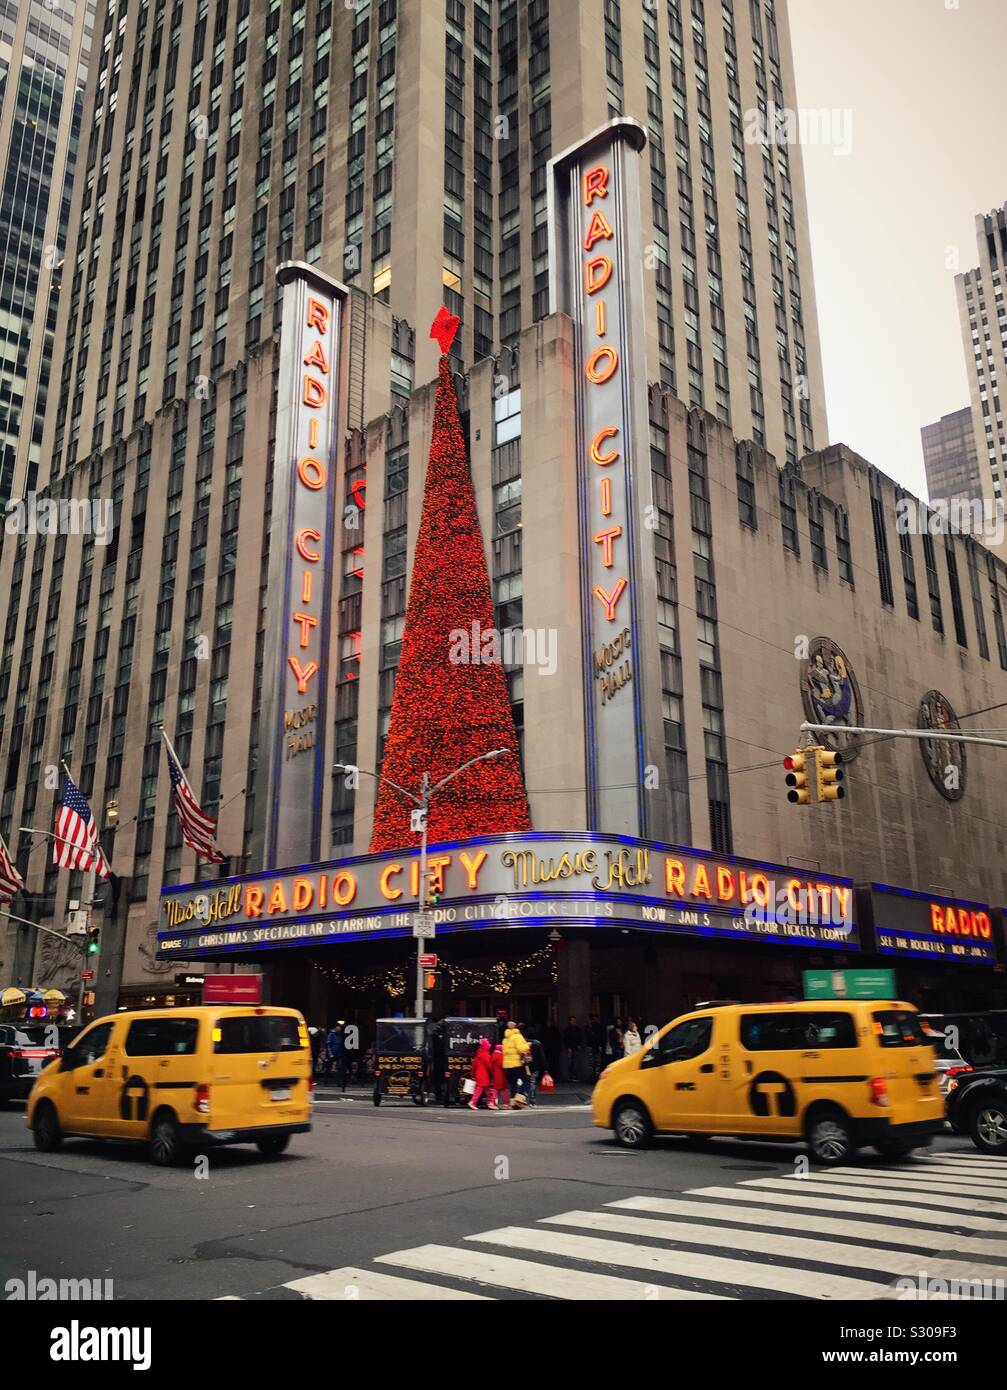 Christmas decorations on the front of radio city music Hall in Rockefeller Center on sixth Ave., NYC, USA Stock Photo